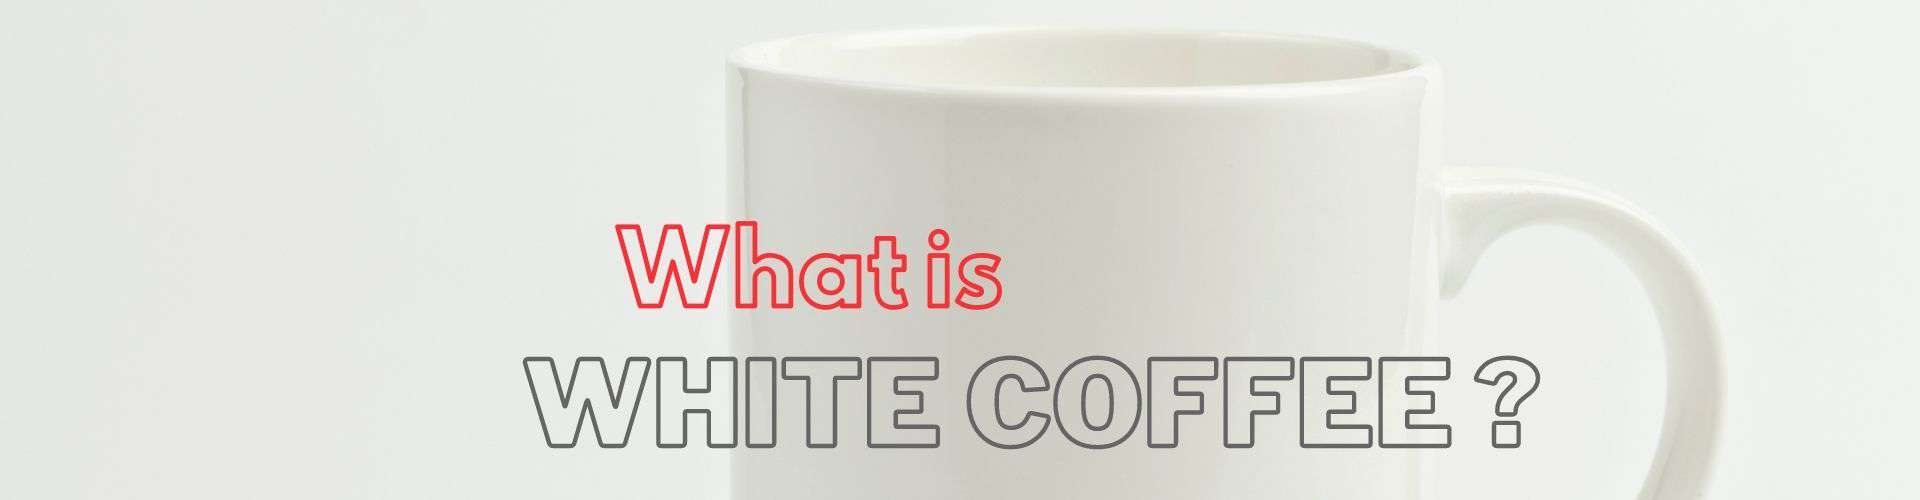 white coffee banner image